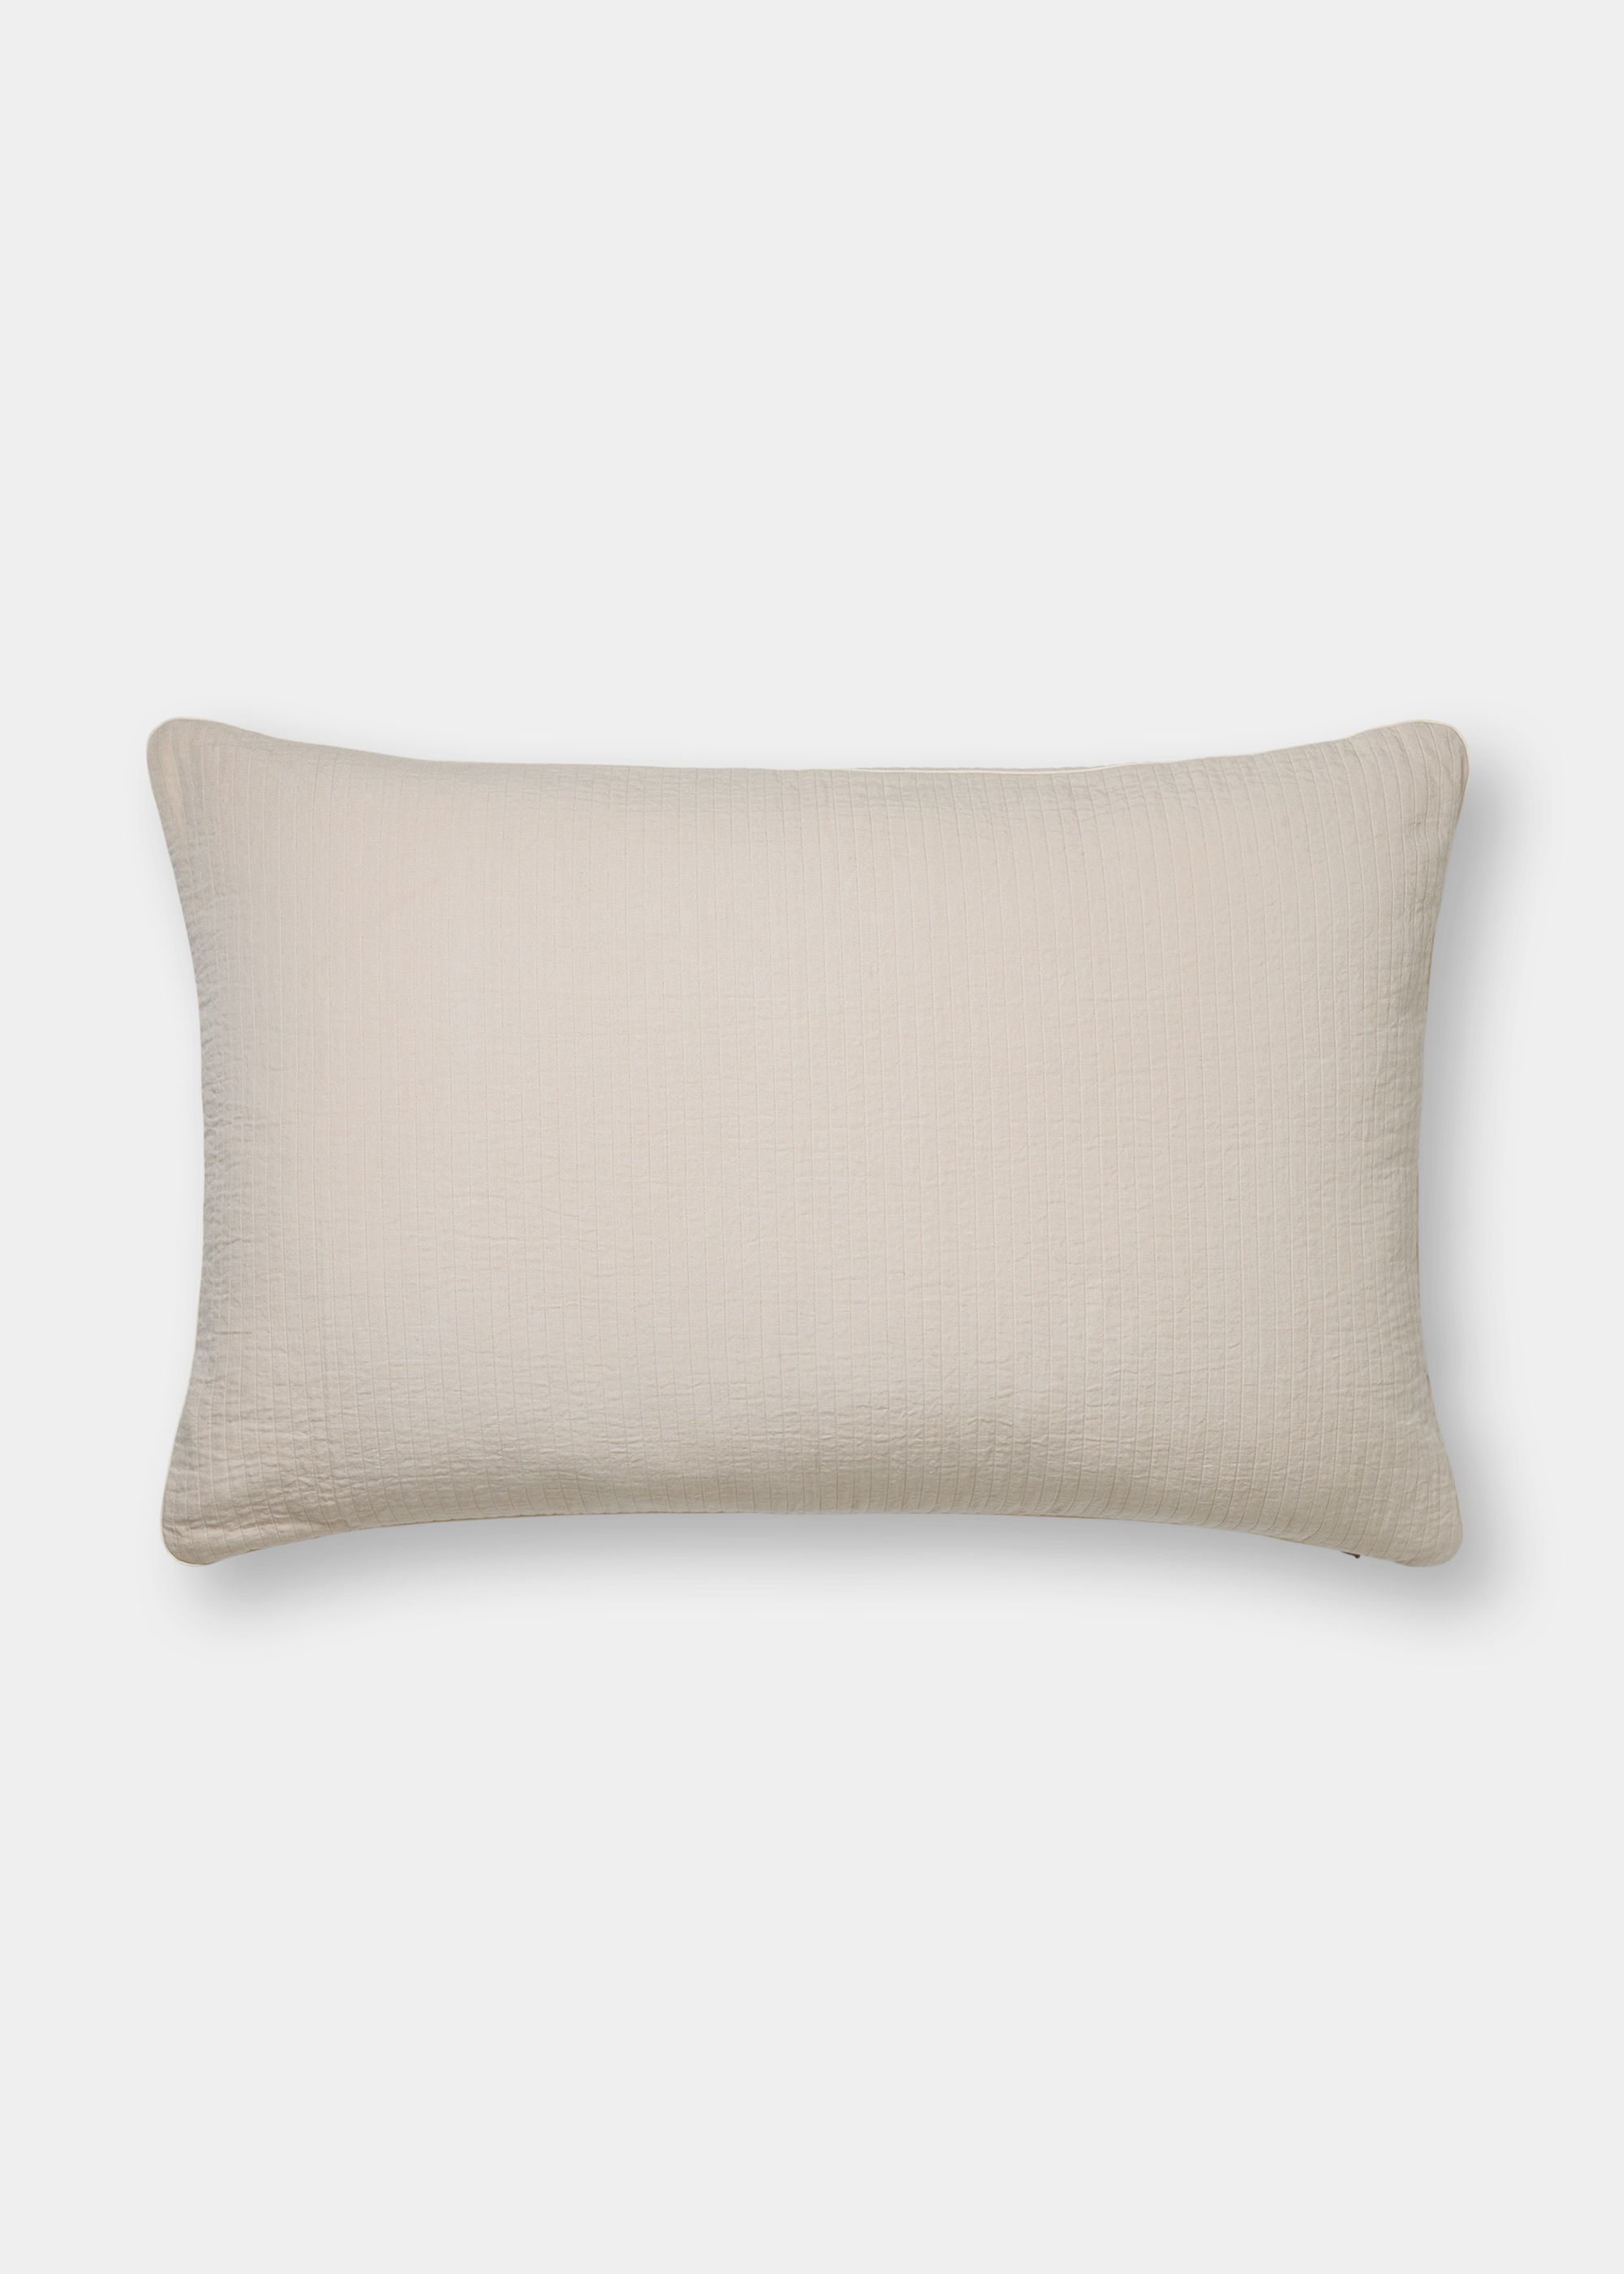 Cushions - Pillow Double 50x80